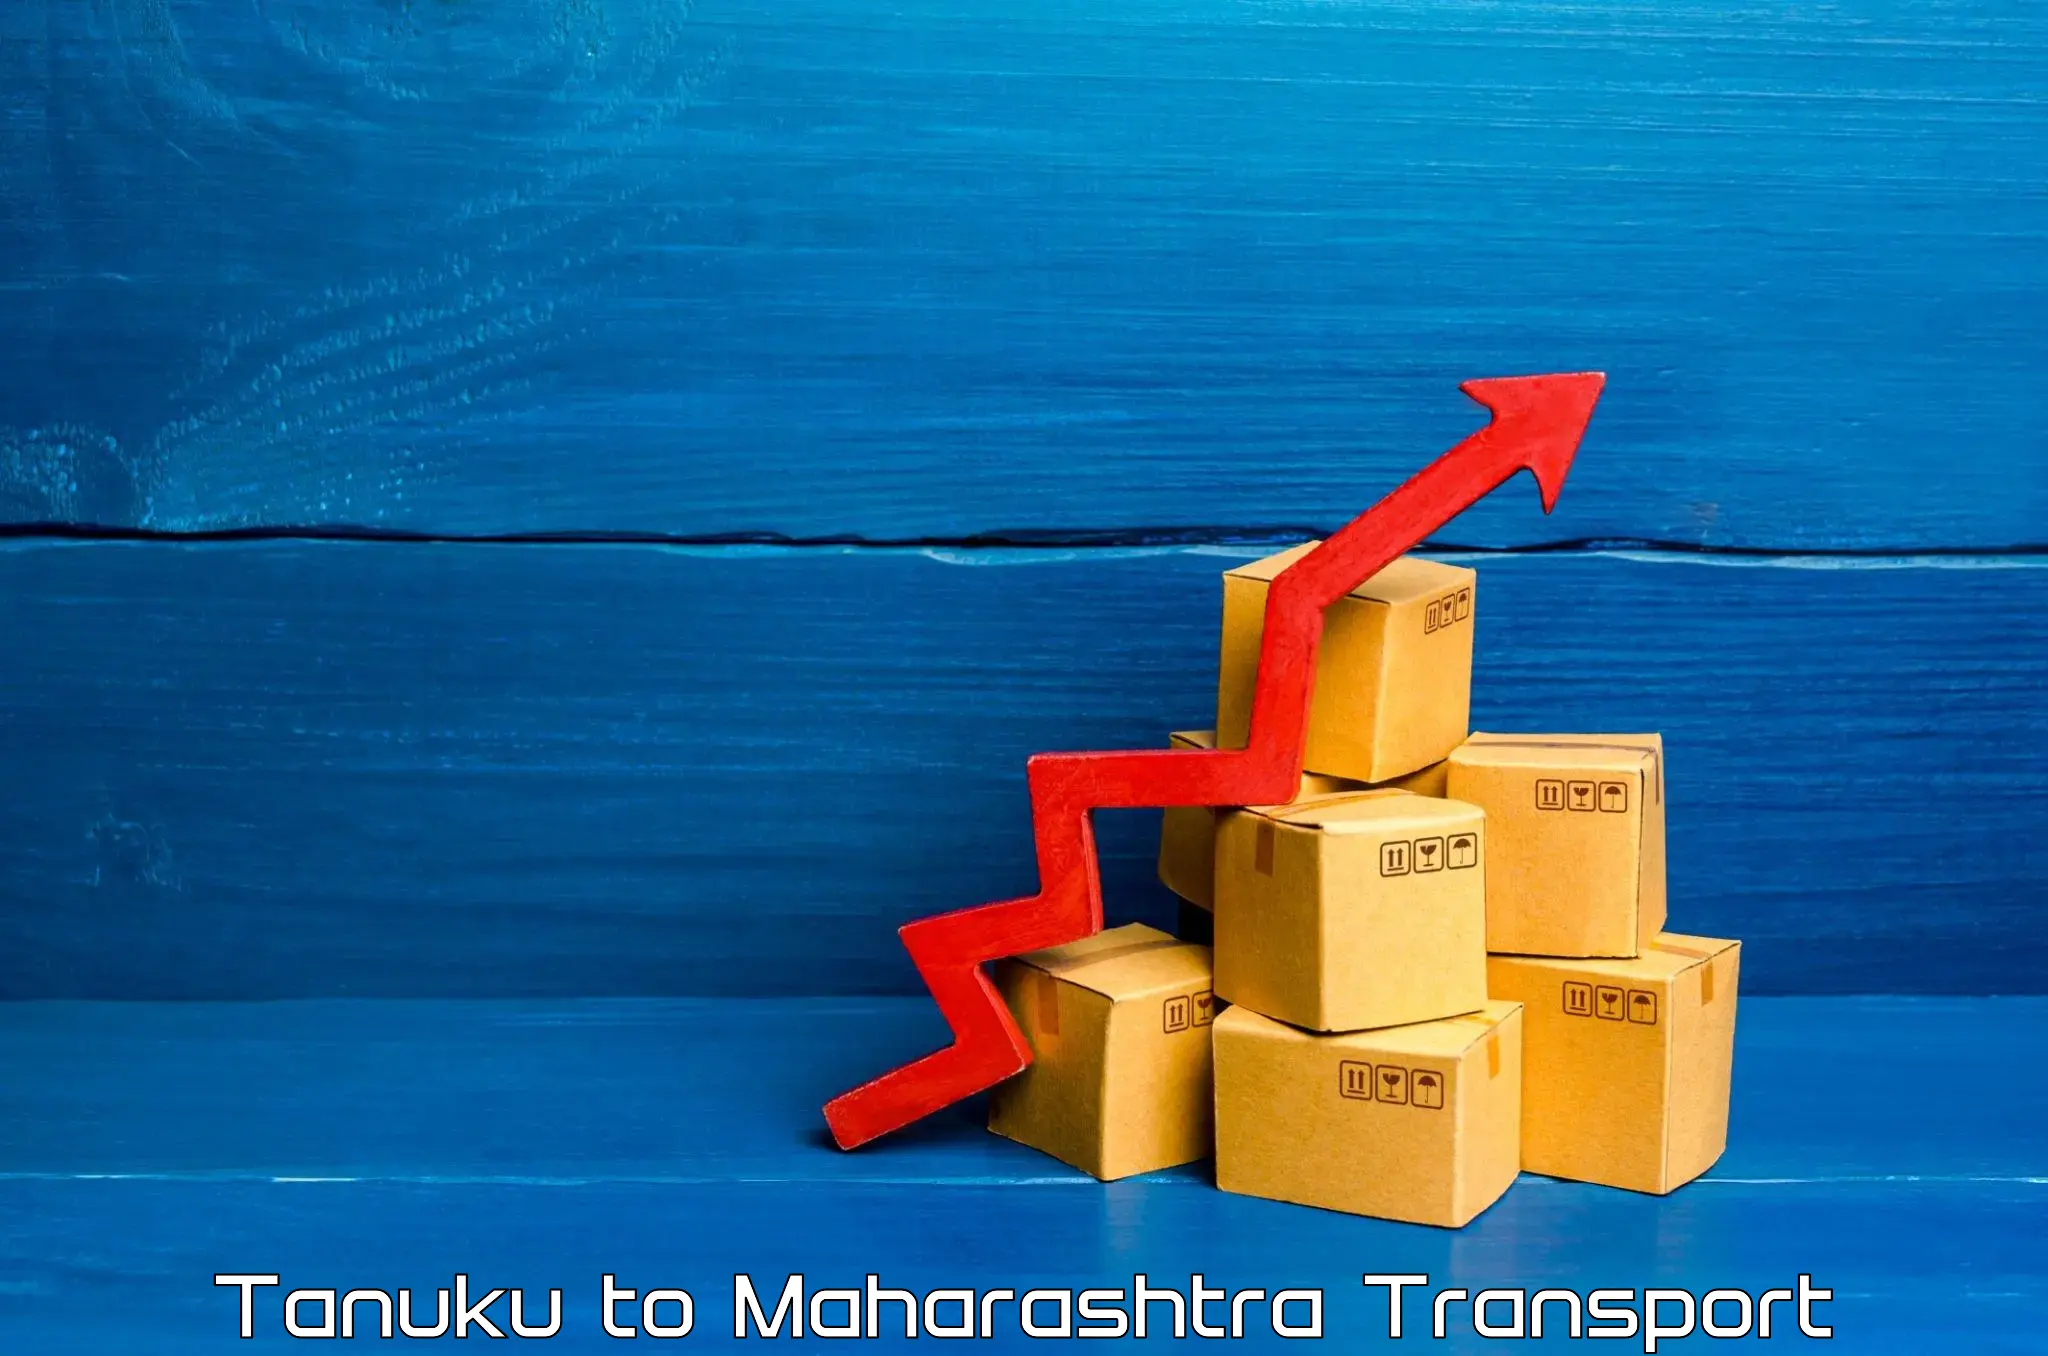 Container transportation services Tanuku to Alephata